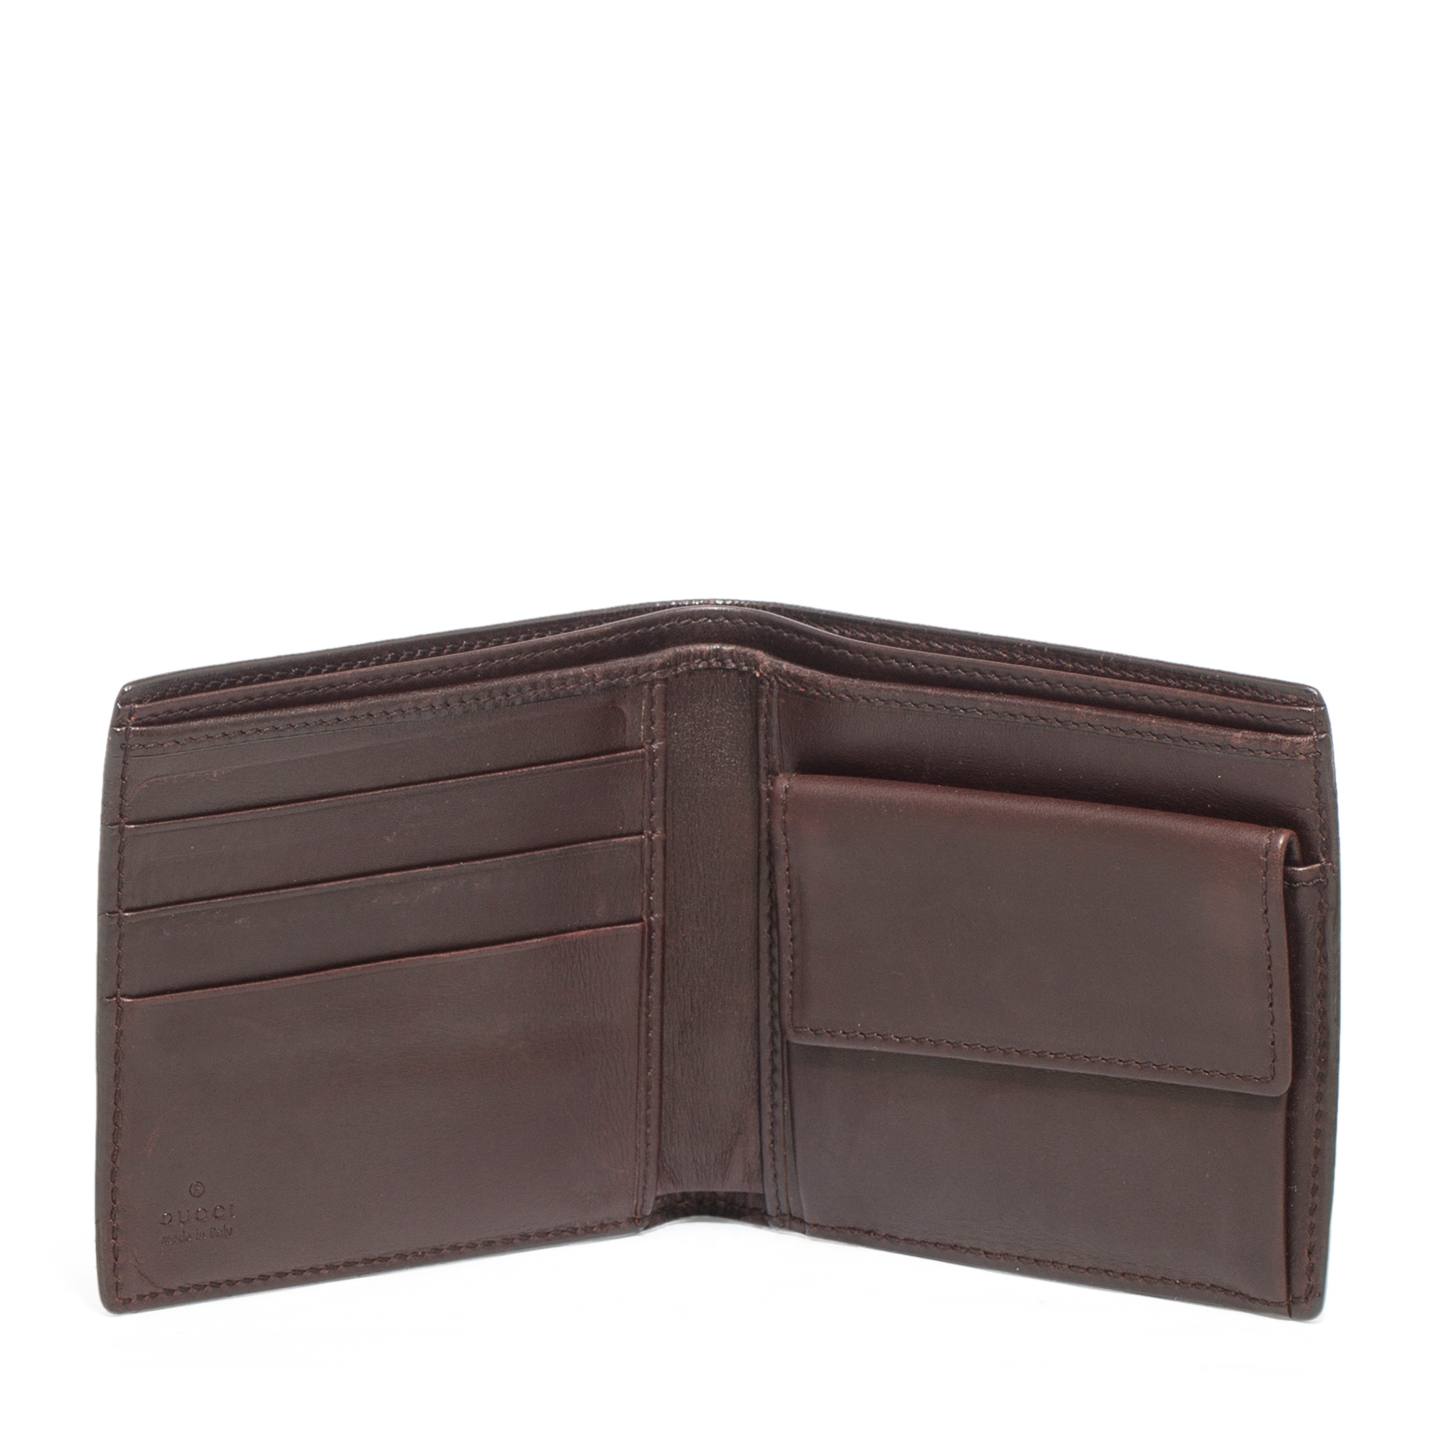 Gucci Brown Guccissima Leather Bi-Fold Wallet - LabelCentric